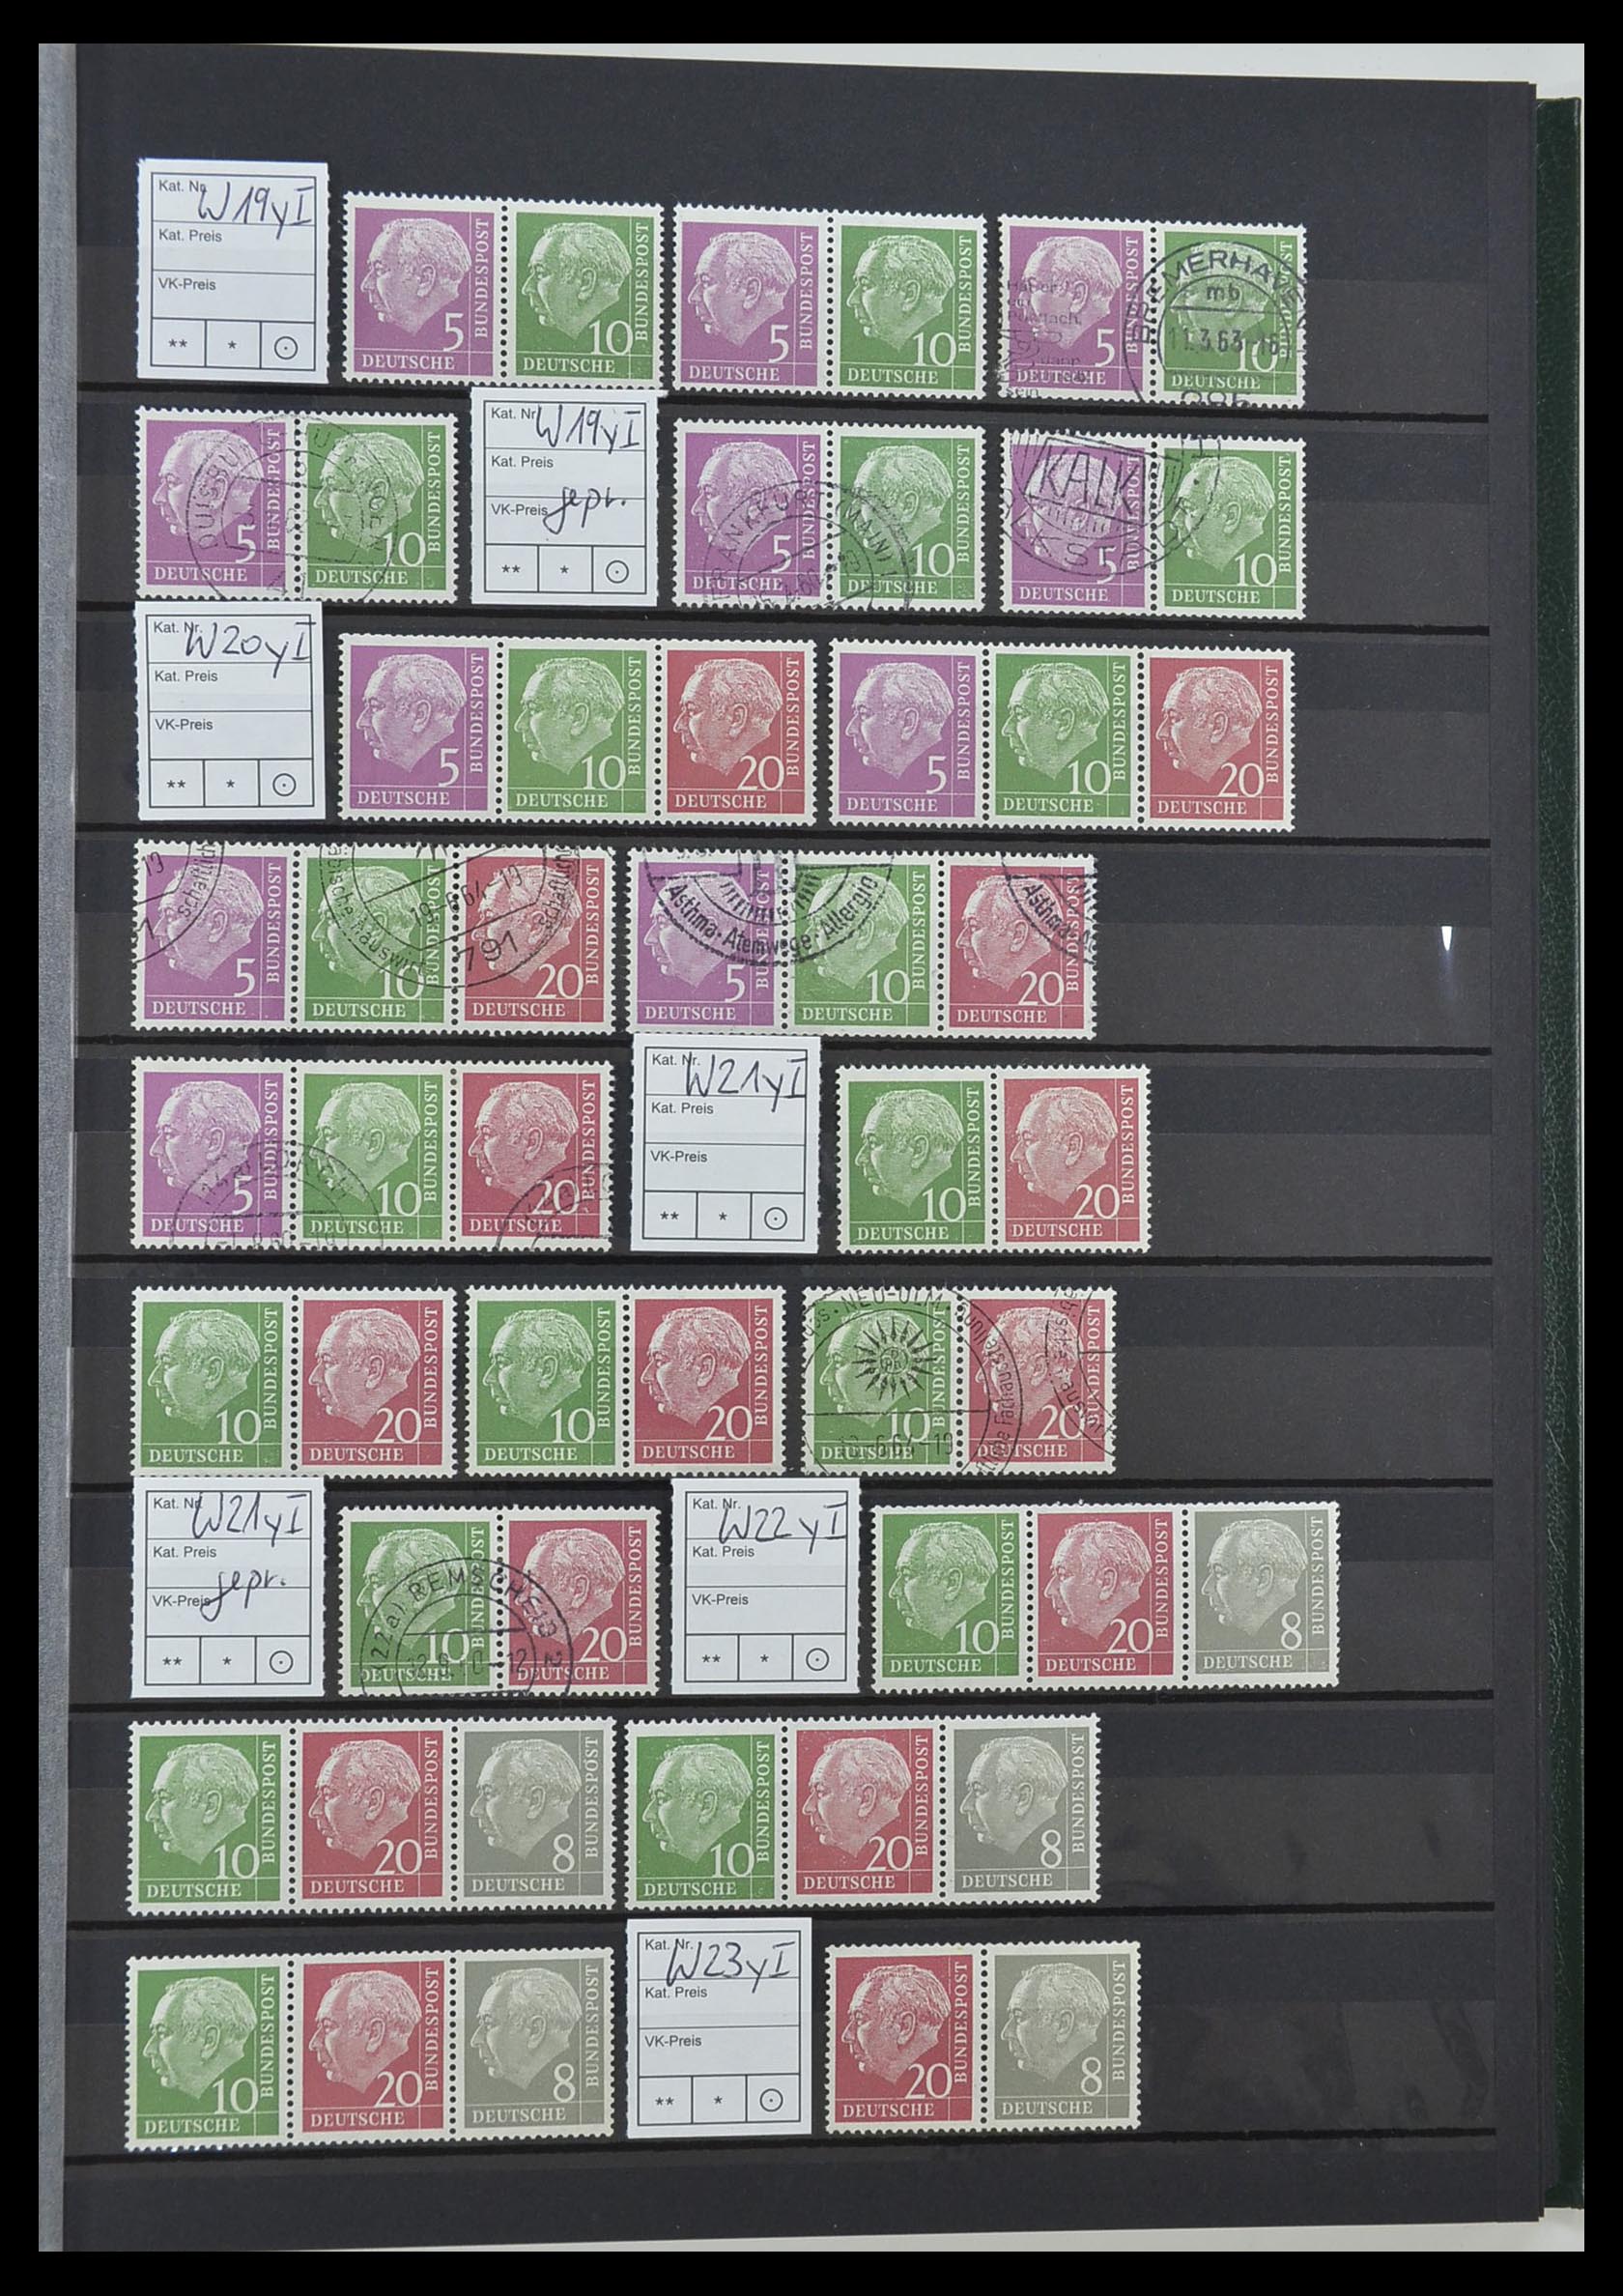 33275 025 - Stamp collection 33275 Bundespost combinations 1951-1960.